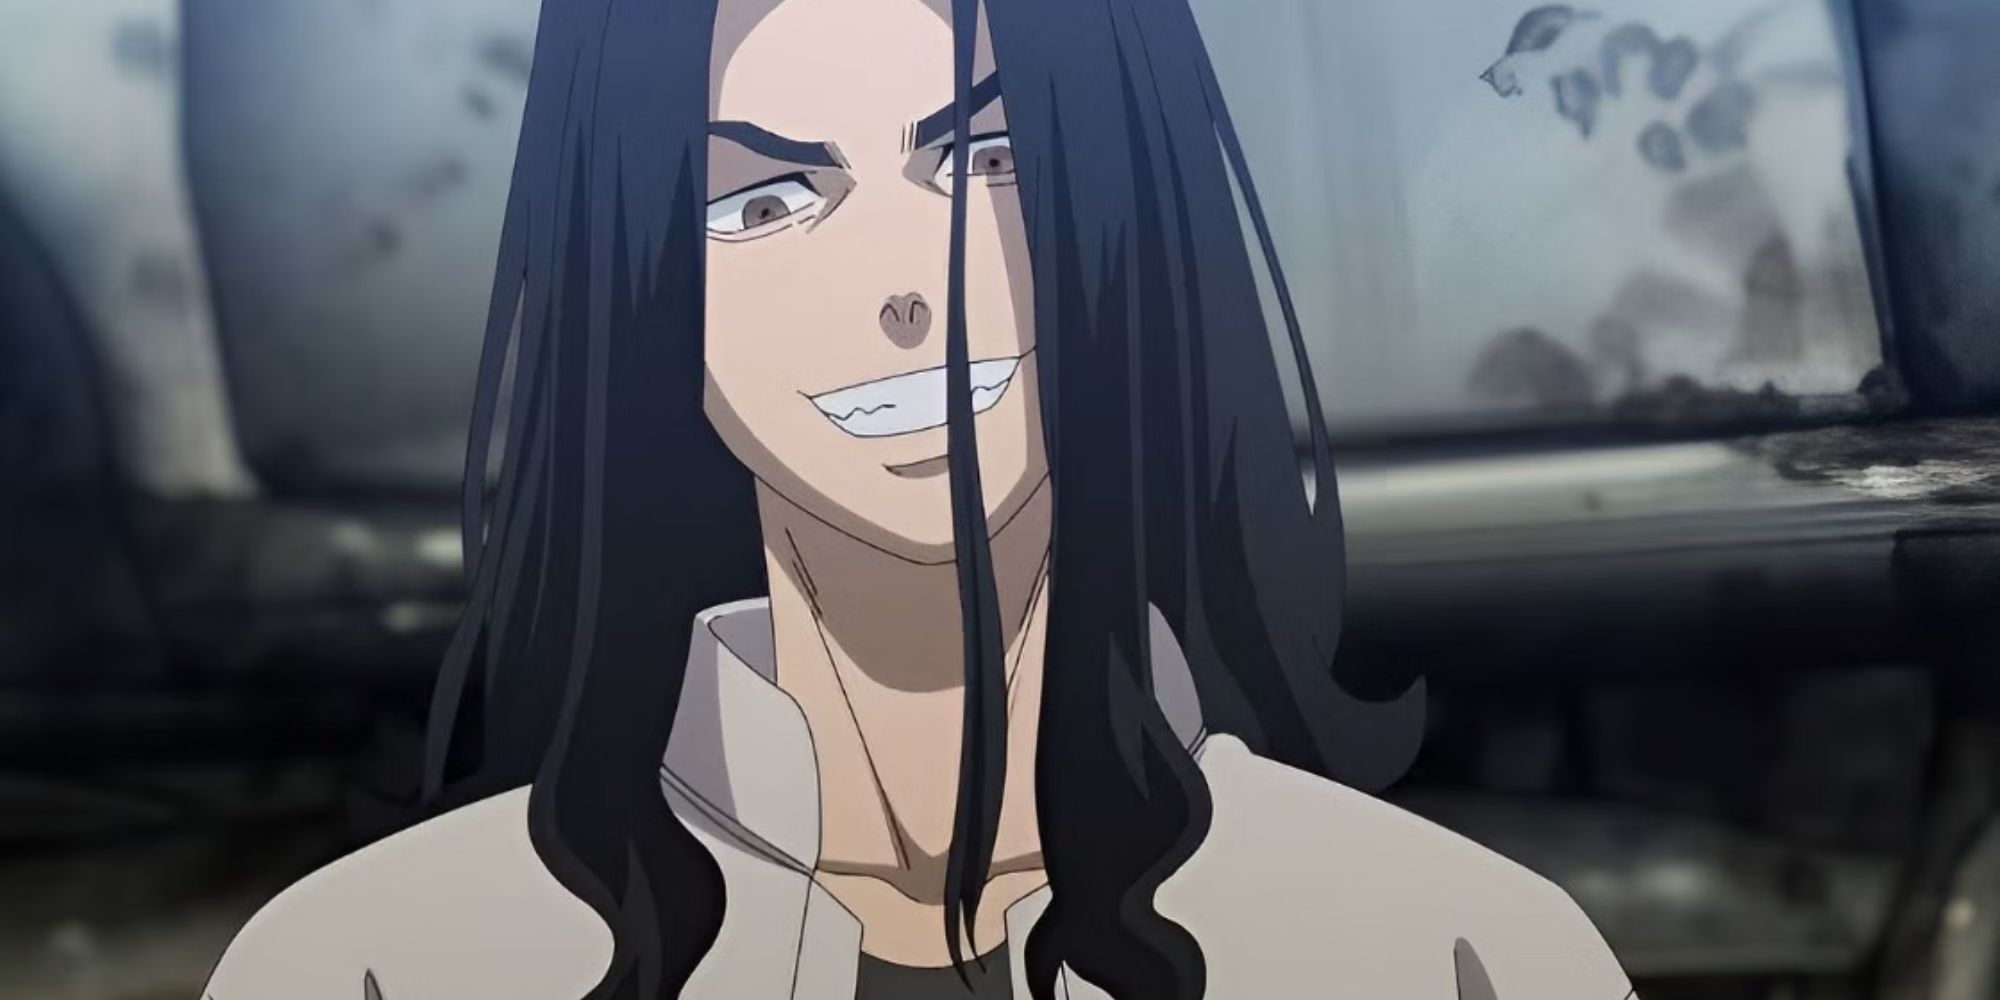 a boy with long black hair smiles